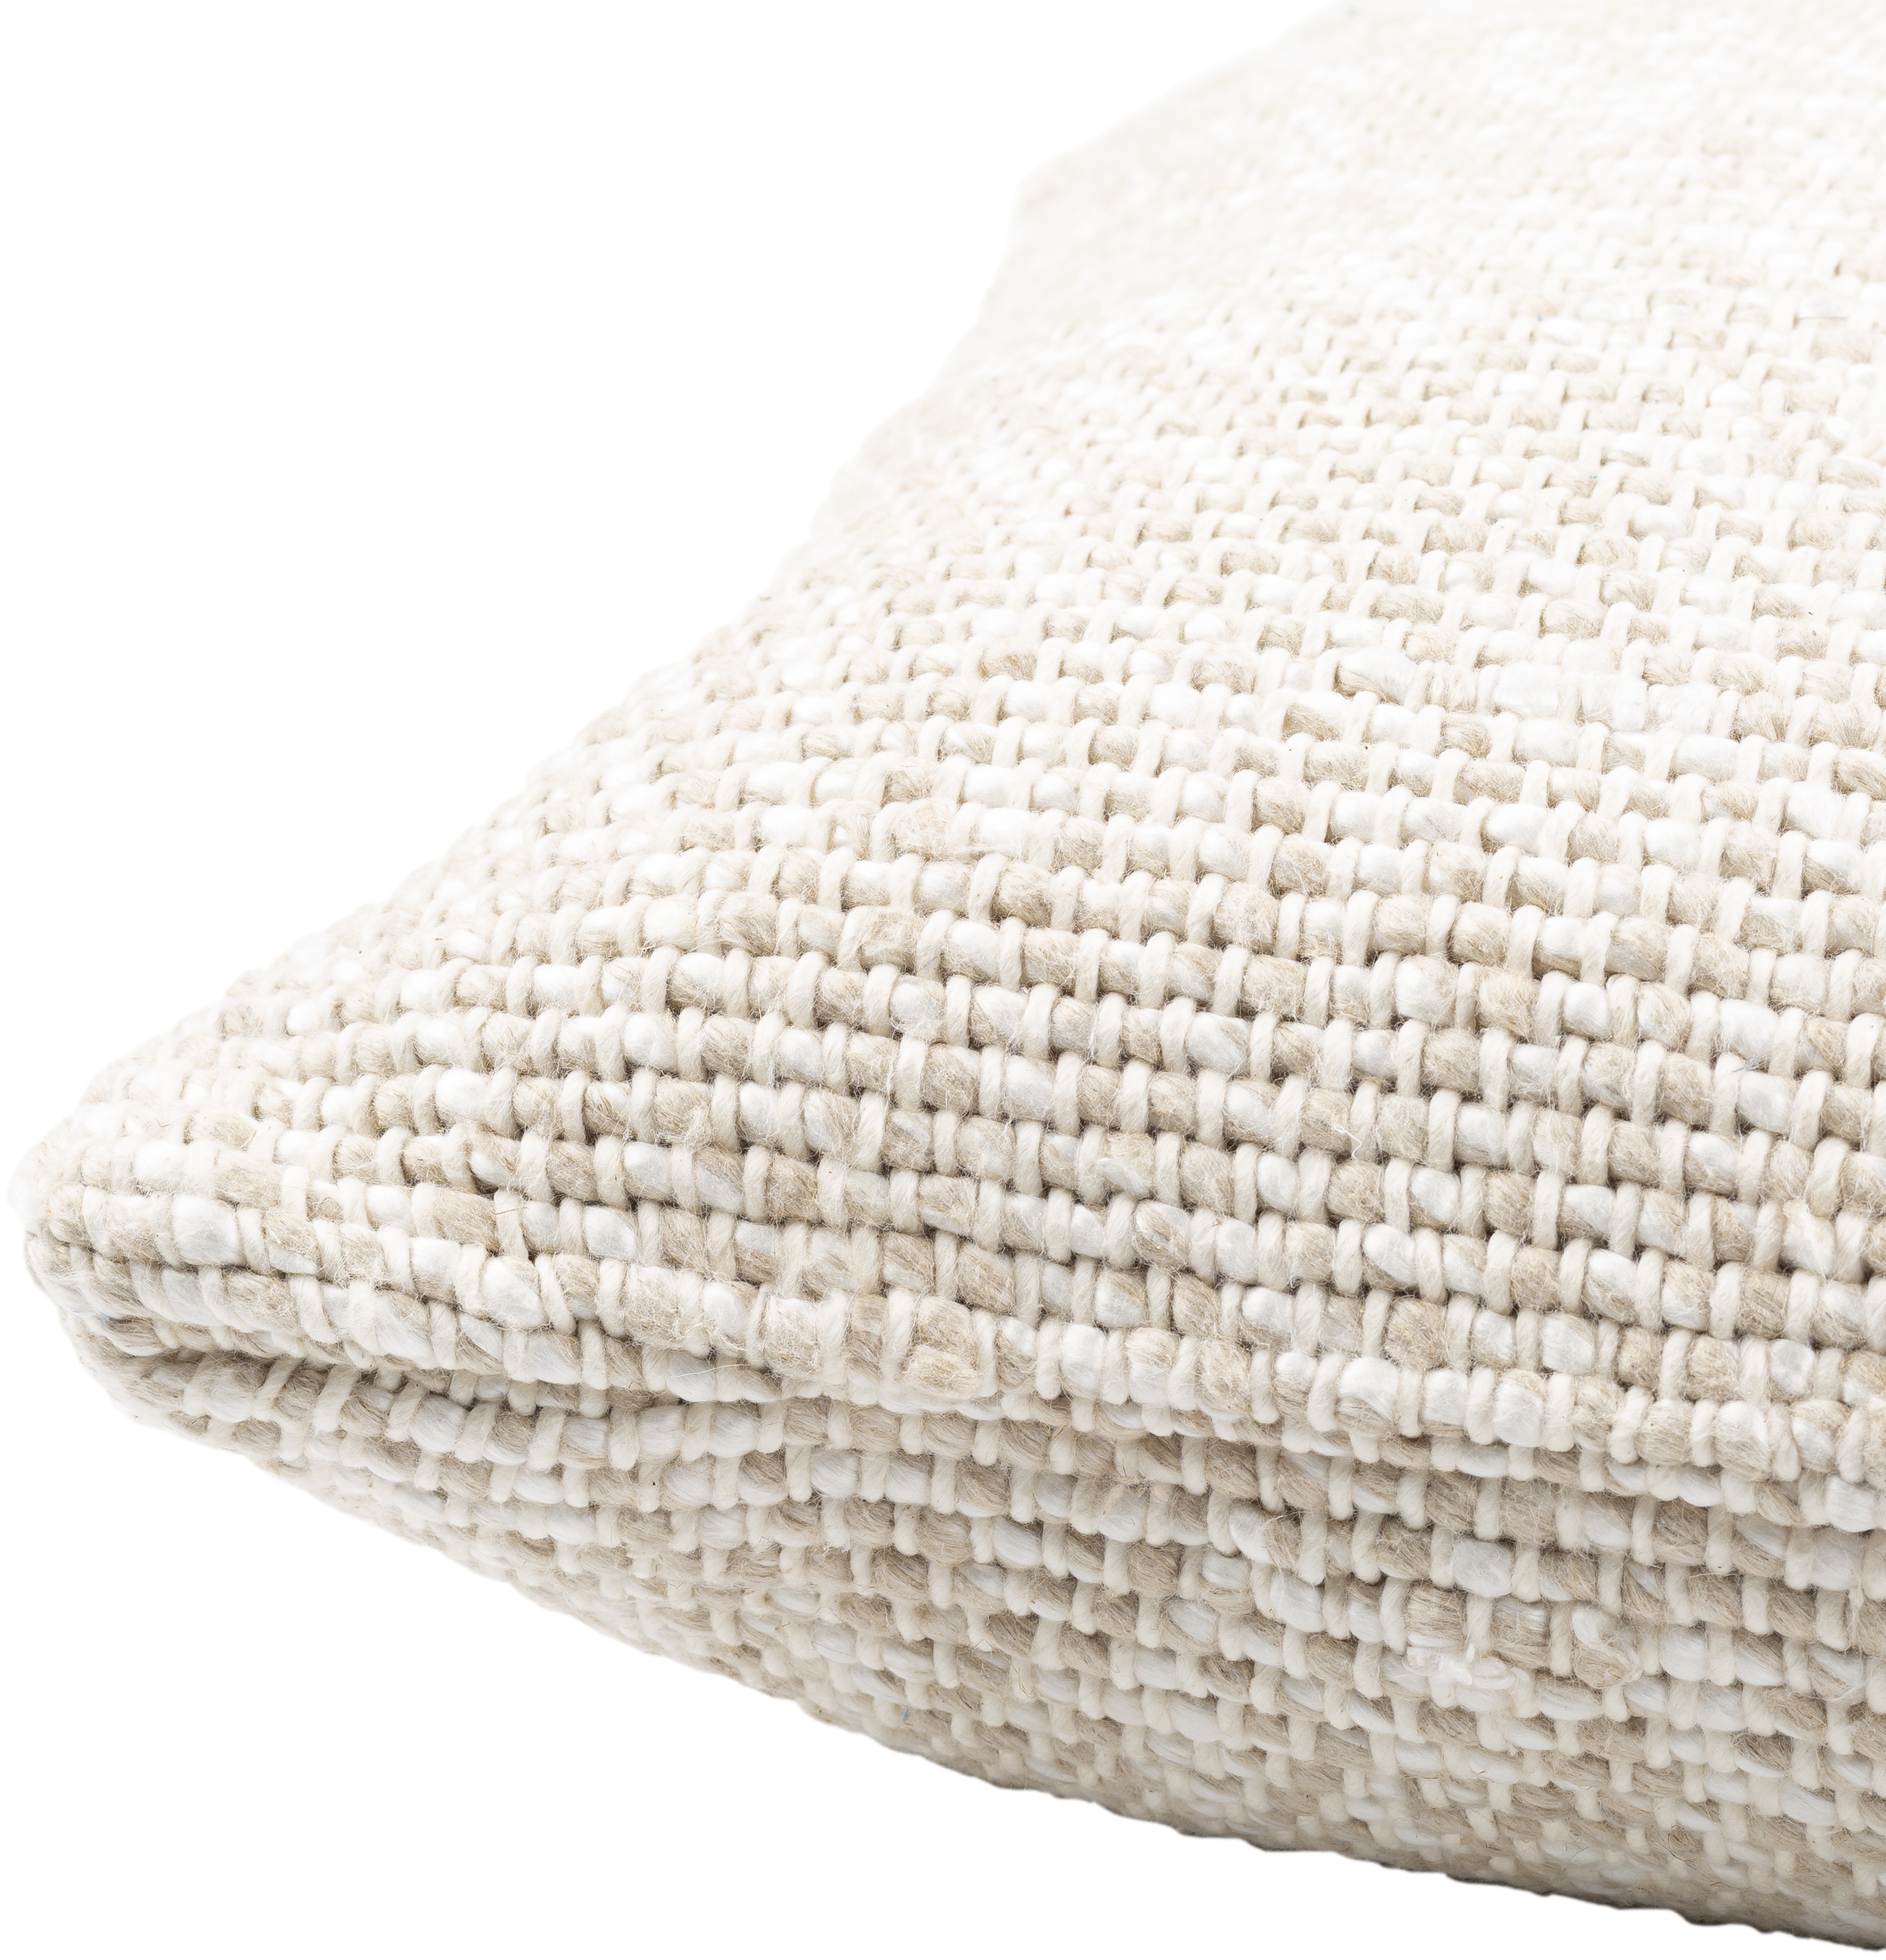 Theresa Pillow, Pillow Shell with Polyester Insert, 20" x 20" - Image 1